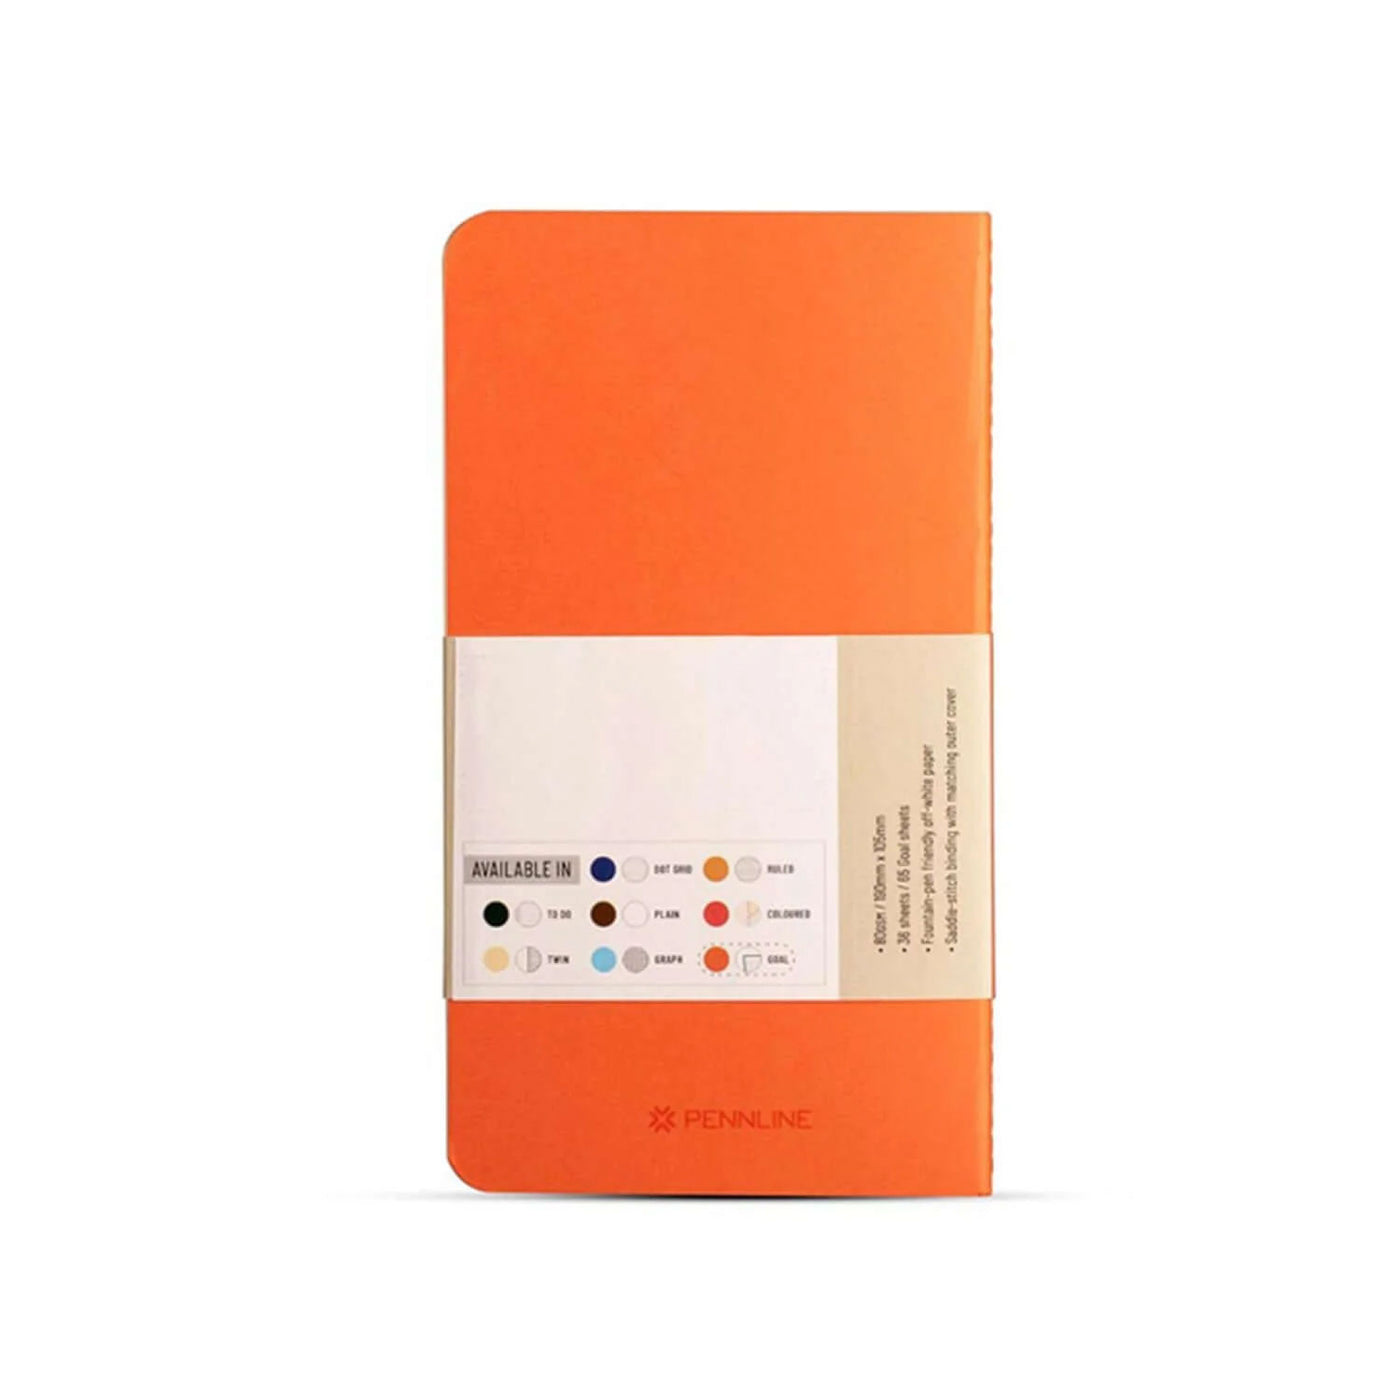 Pennline Quikfill Notebook Refill For Quikrite, Orange - Set Of 2 8